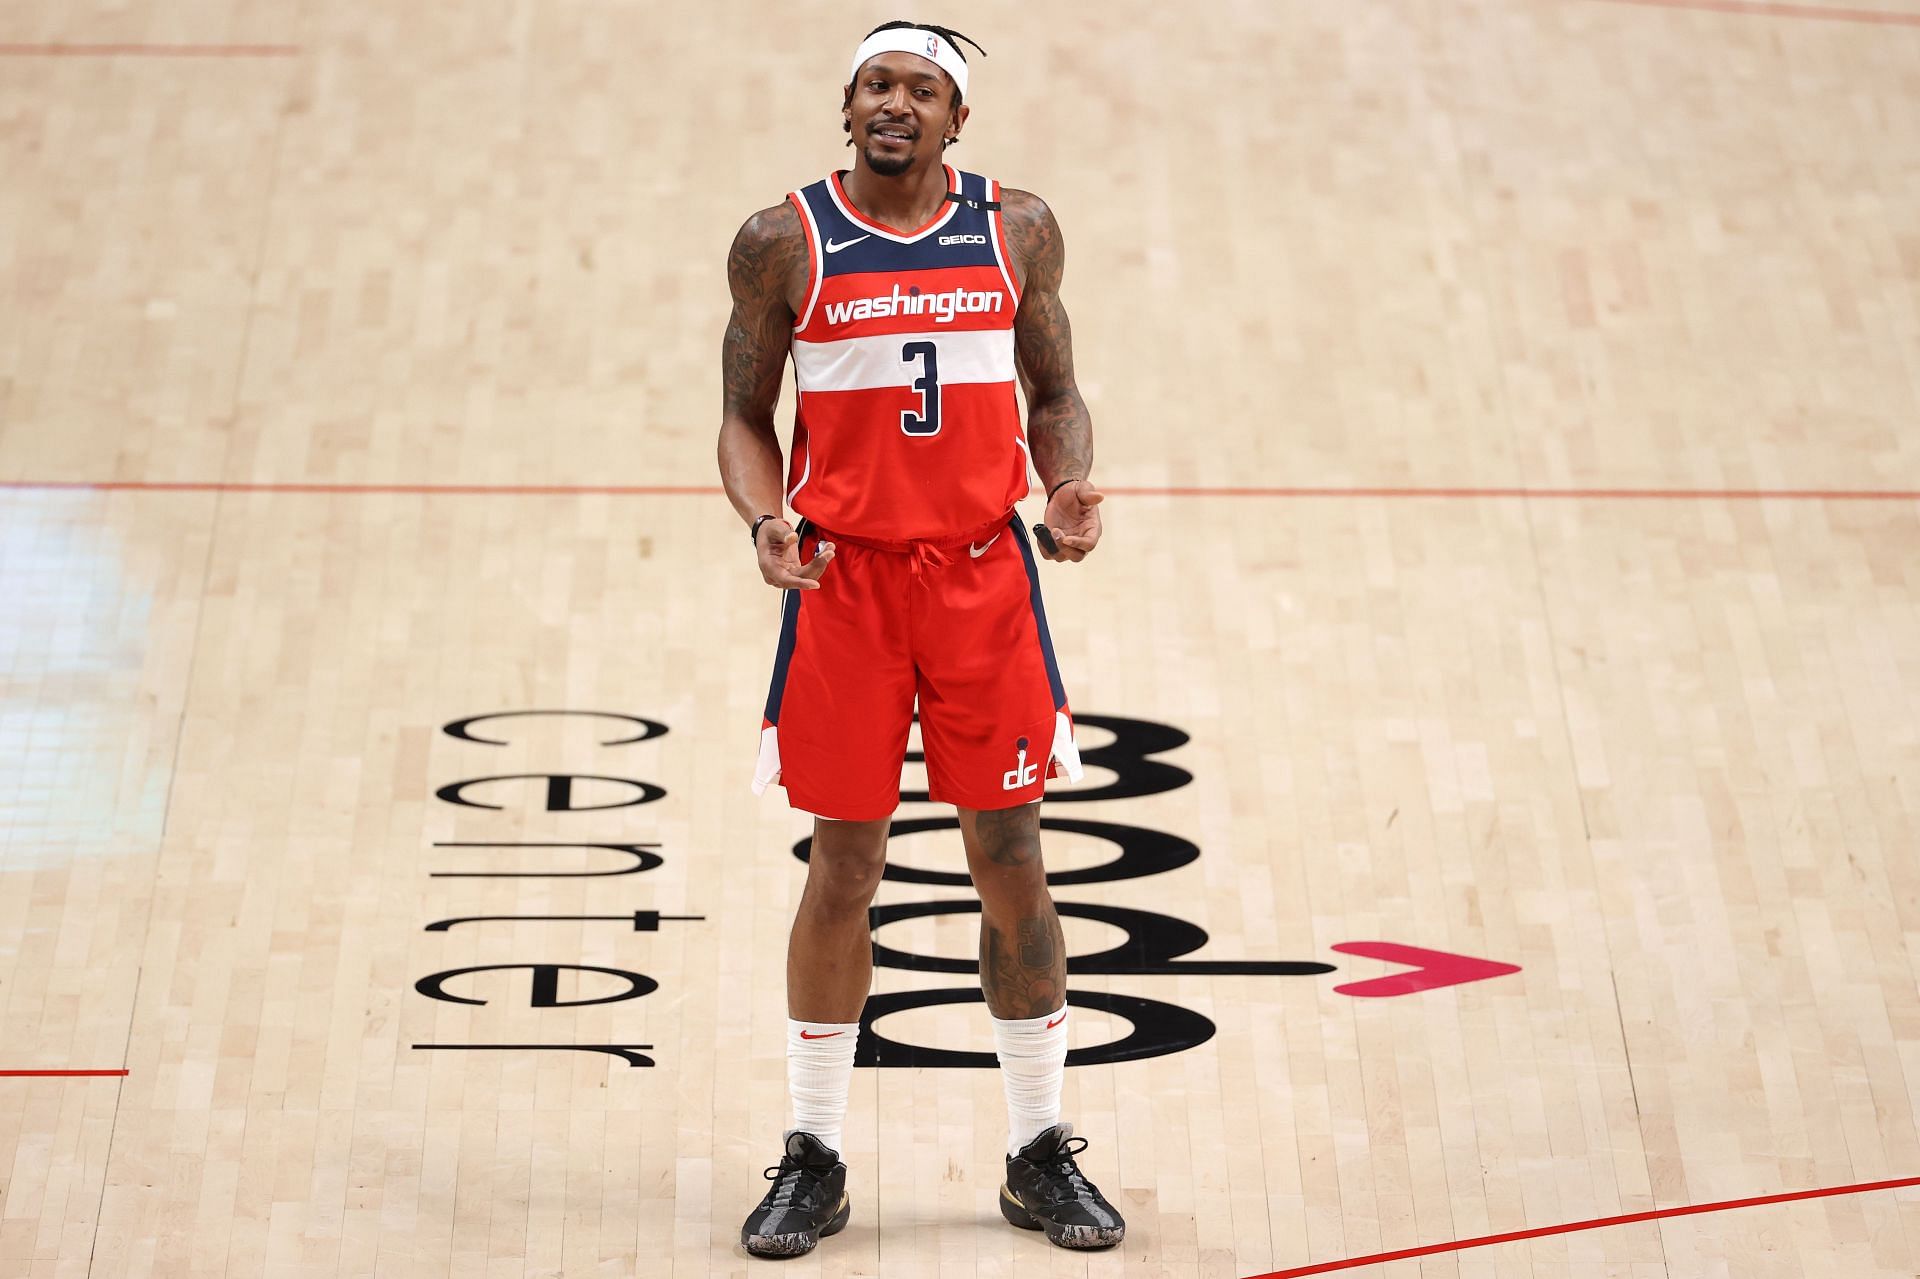 Bradley Beal #3 of the Washington Wizards reacts in the first quarter against the Portland Trail Blazers at Moda Center on February 20, 2021 in Portland, Oregon.